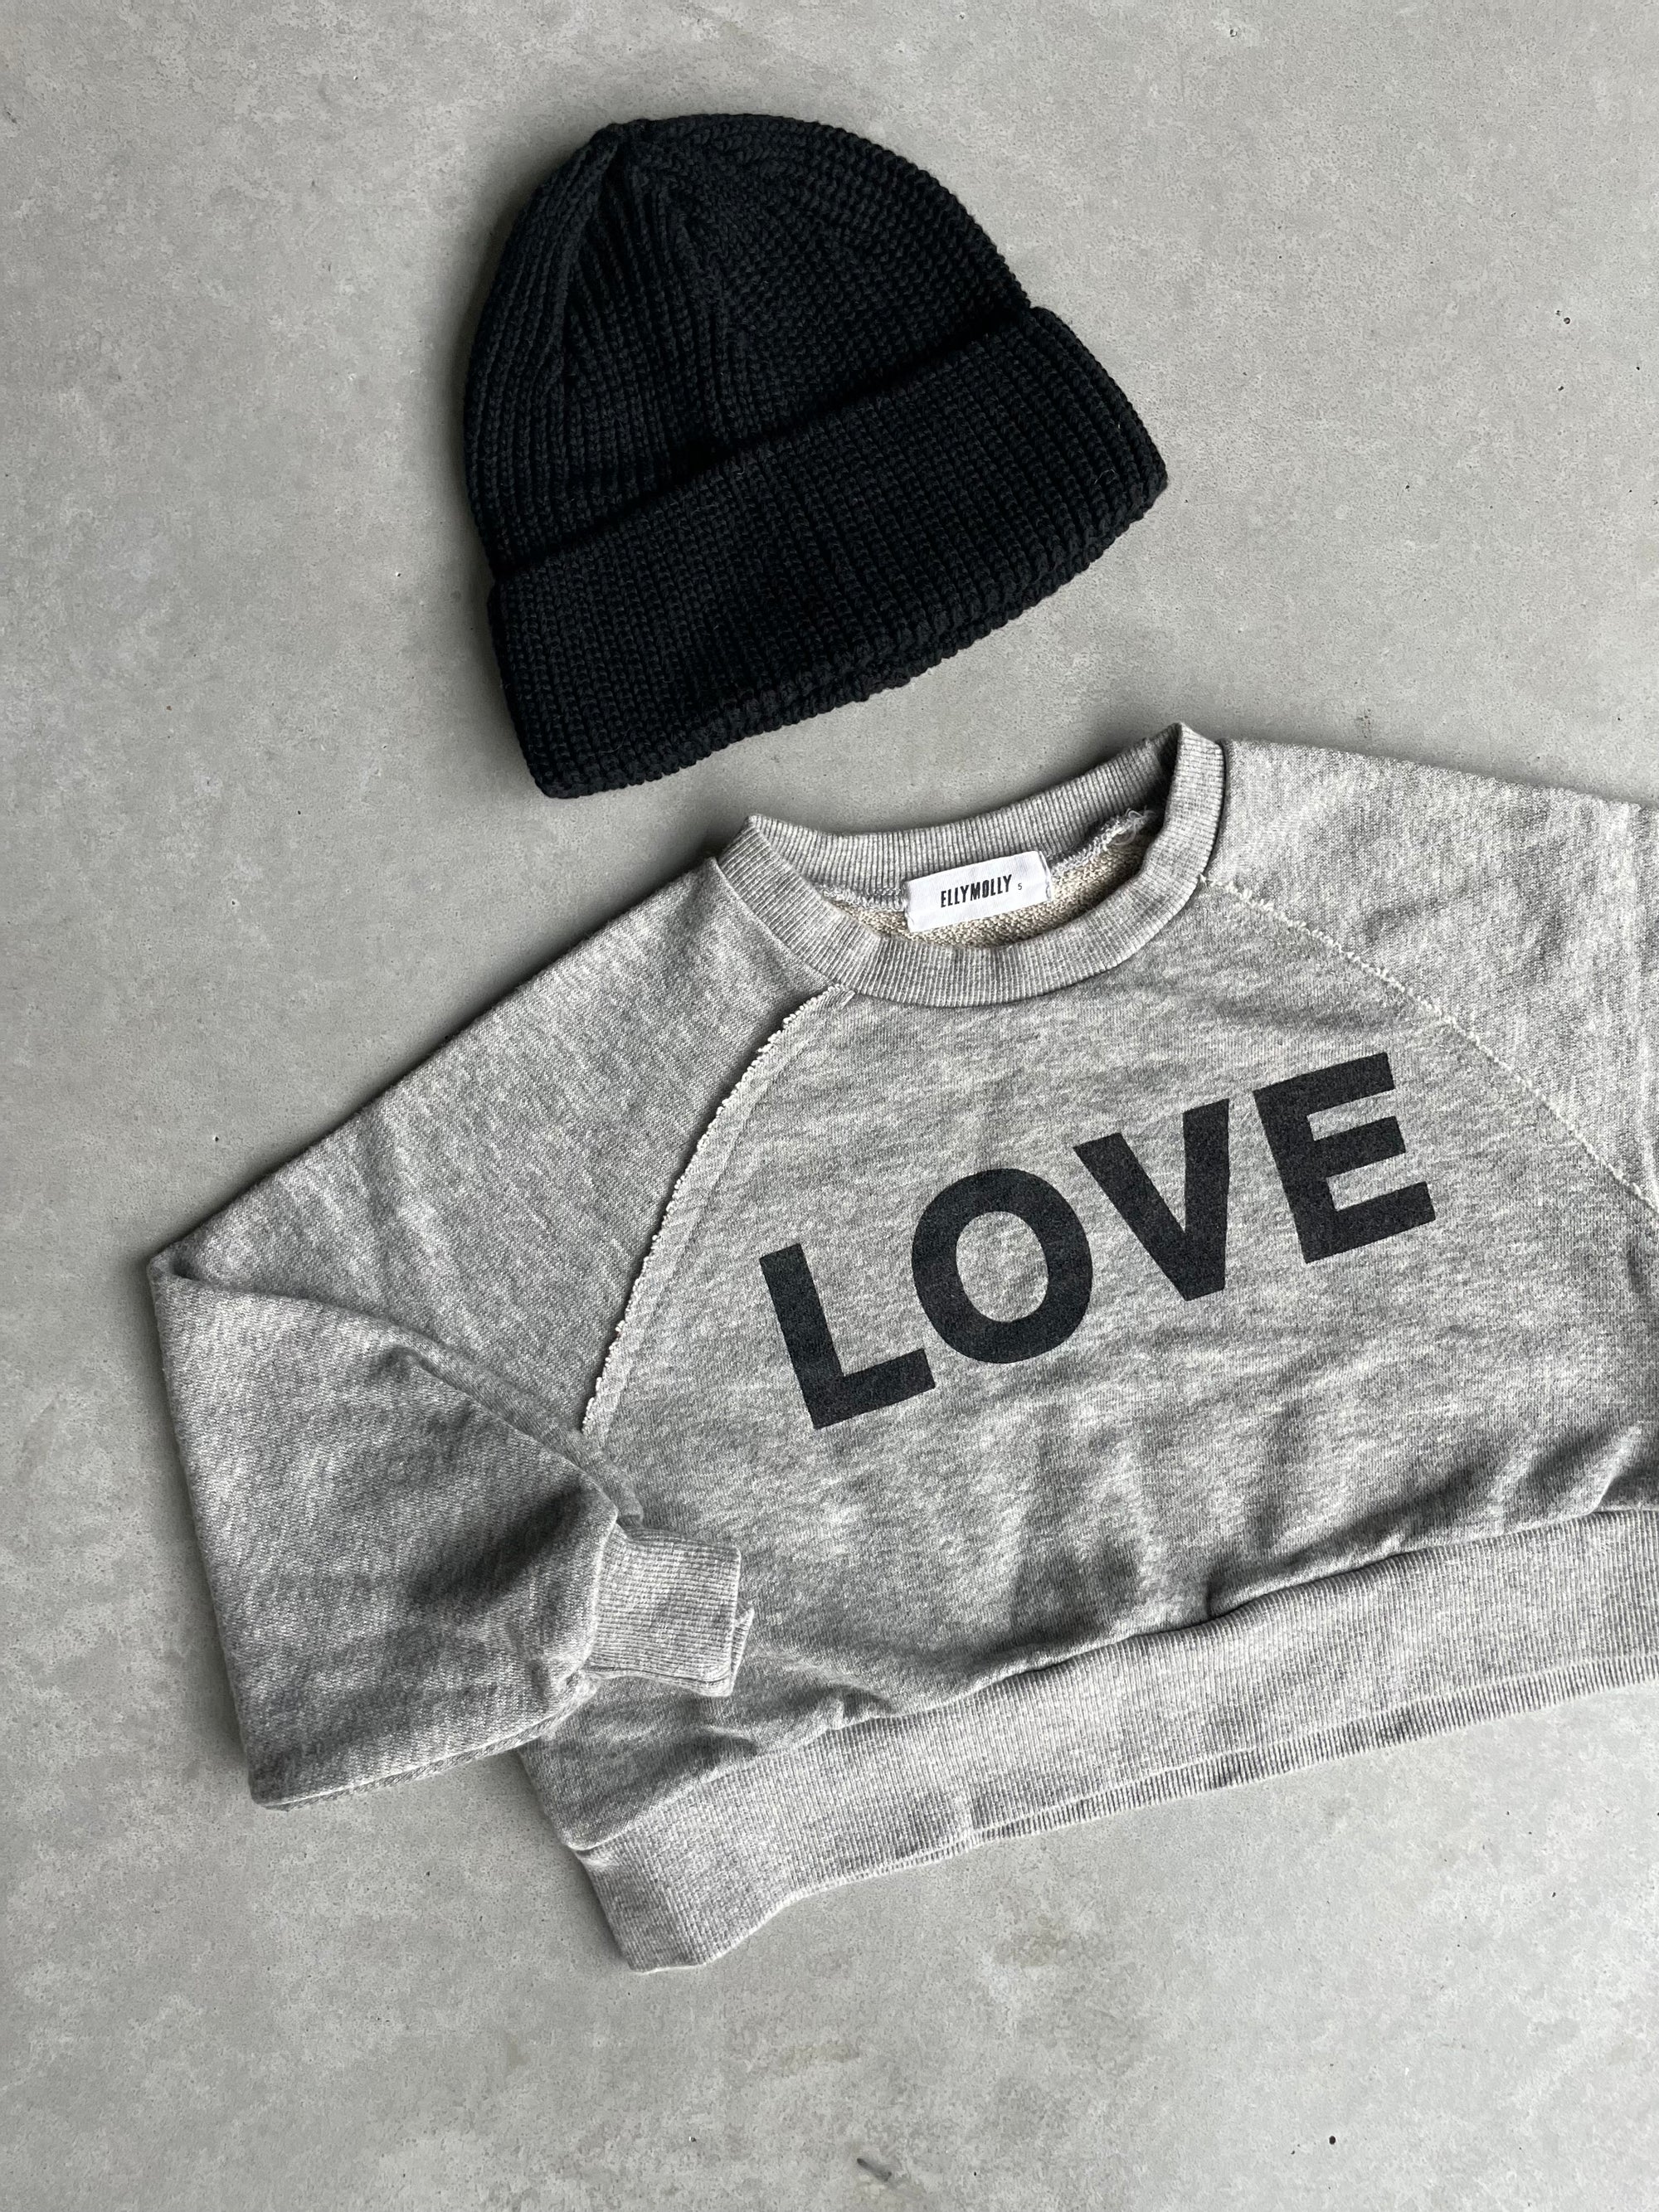 LOVE cropped sweater